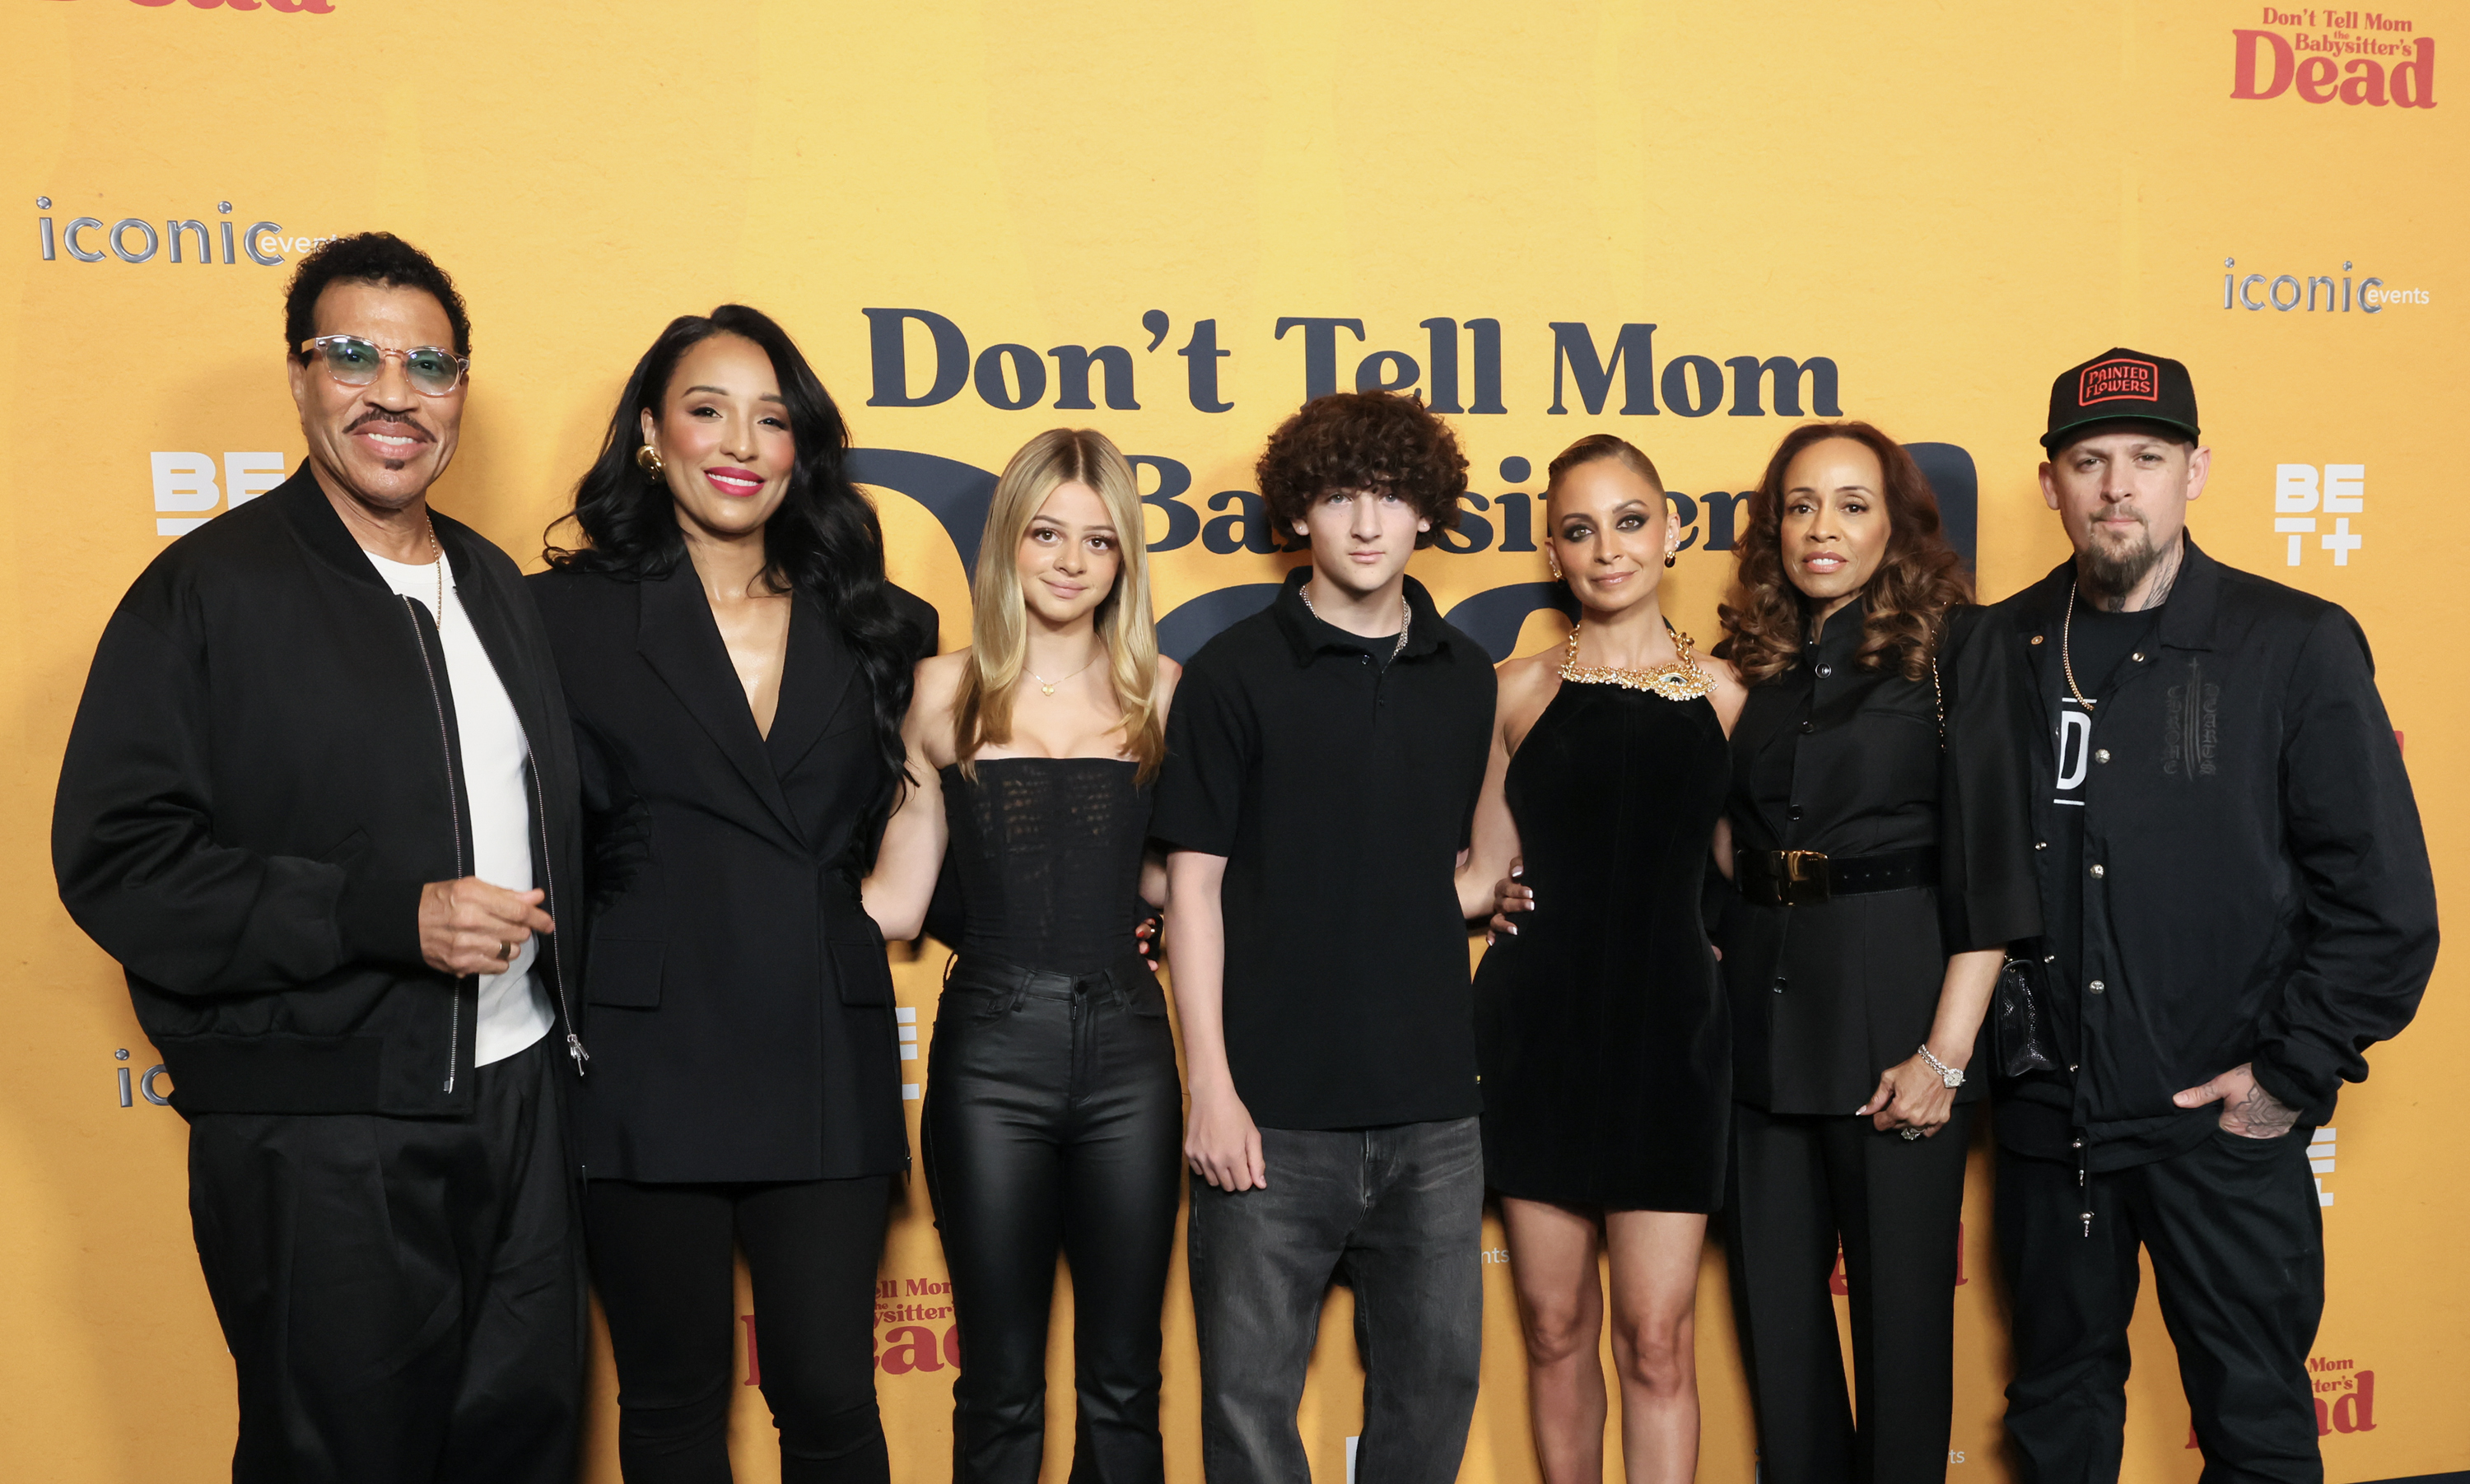 Lionel Richie, Lisa Parigi, Harlow Madden, Sparrow Madden, Nicole Richie, Brenda Harvey-Richie, and Joel Madden at the premiere of "Don't Tell Mom the Babysitter's Dead" in Los Angeles, California on April 2, 2024 | Source: Getty Images